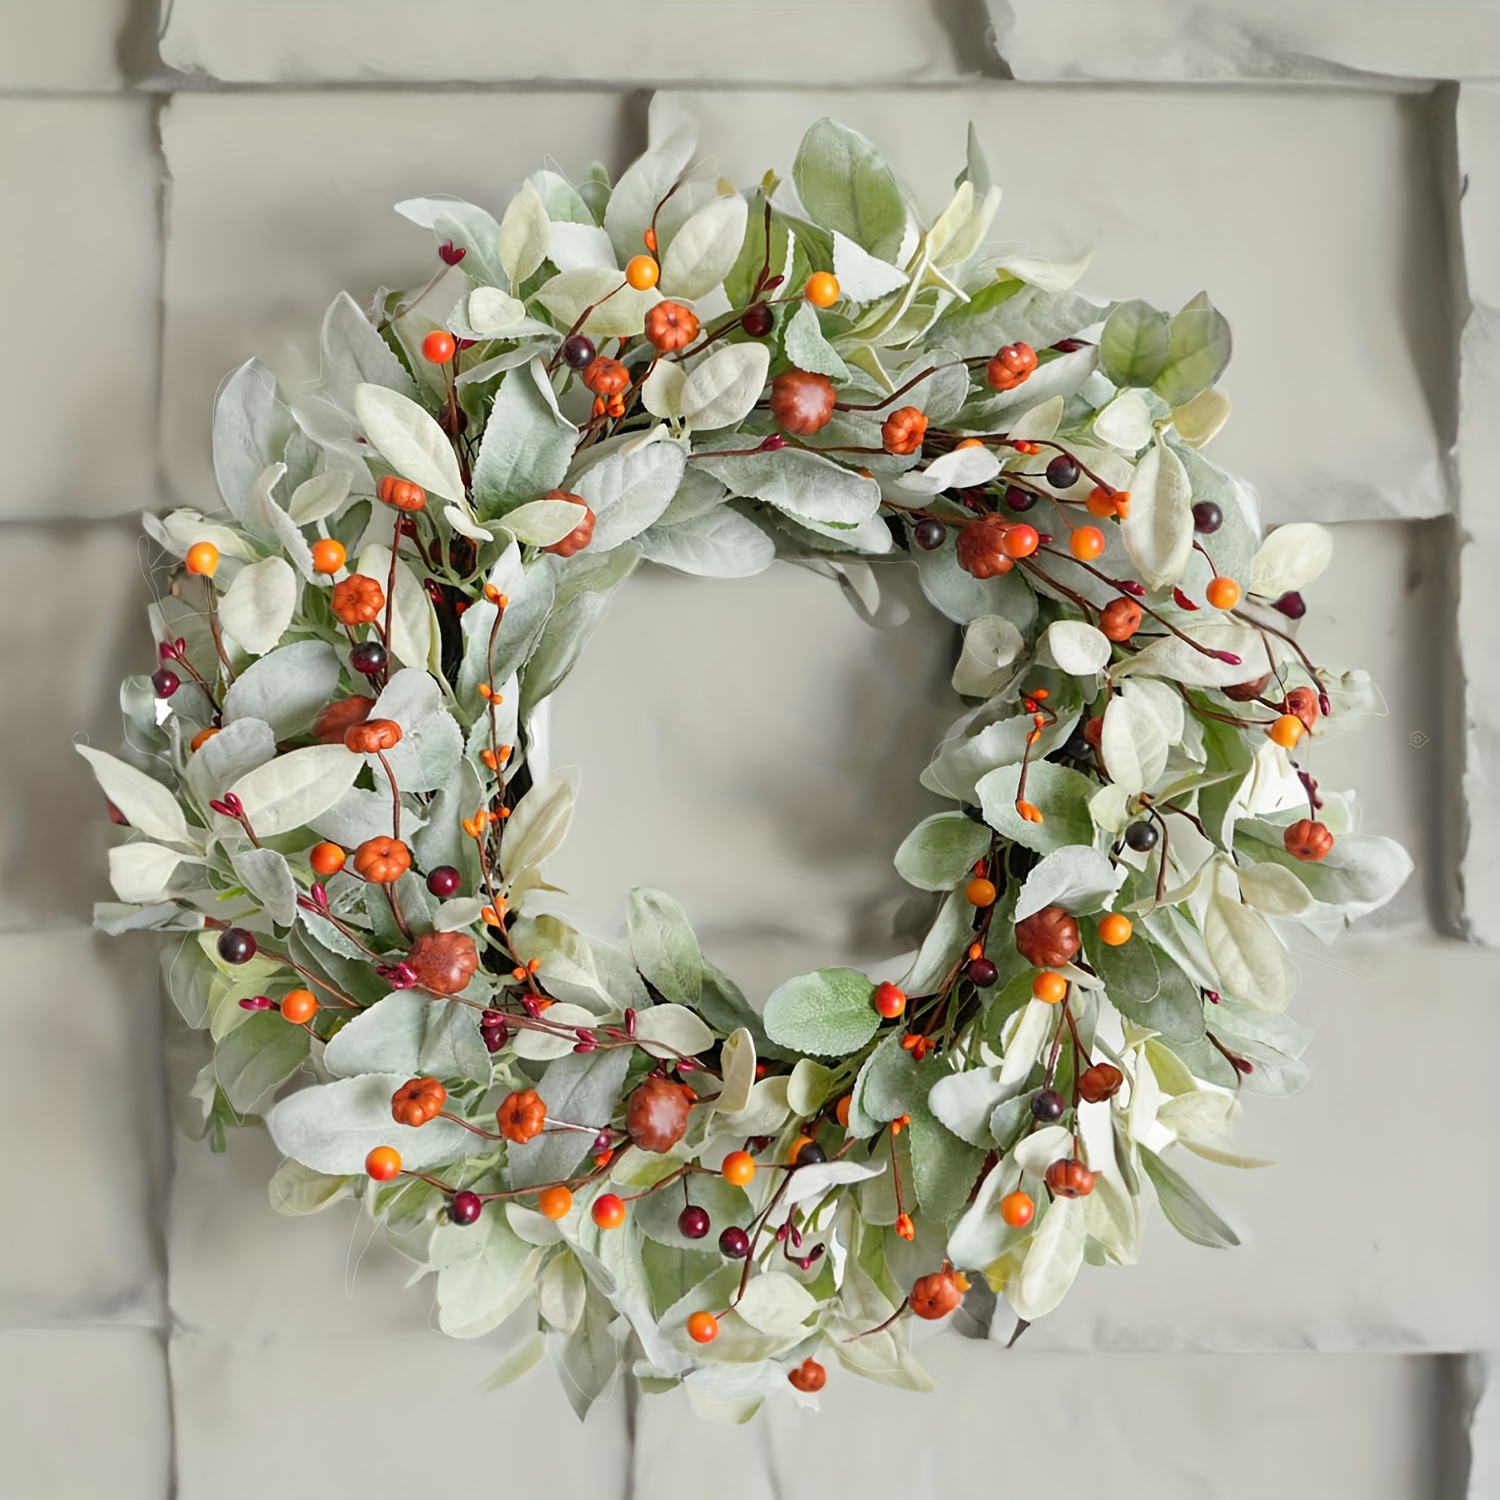  Christmas Decorations - Christmas Wreaths for Front Door  Outside - 19.7 in Winter Door Wreath with Pumpkin Pinecone Berry Christmas  Decorations for Home Farmhouse Harvest Indoor Outdoor : Home & Kitchen